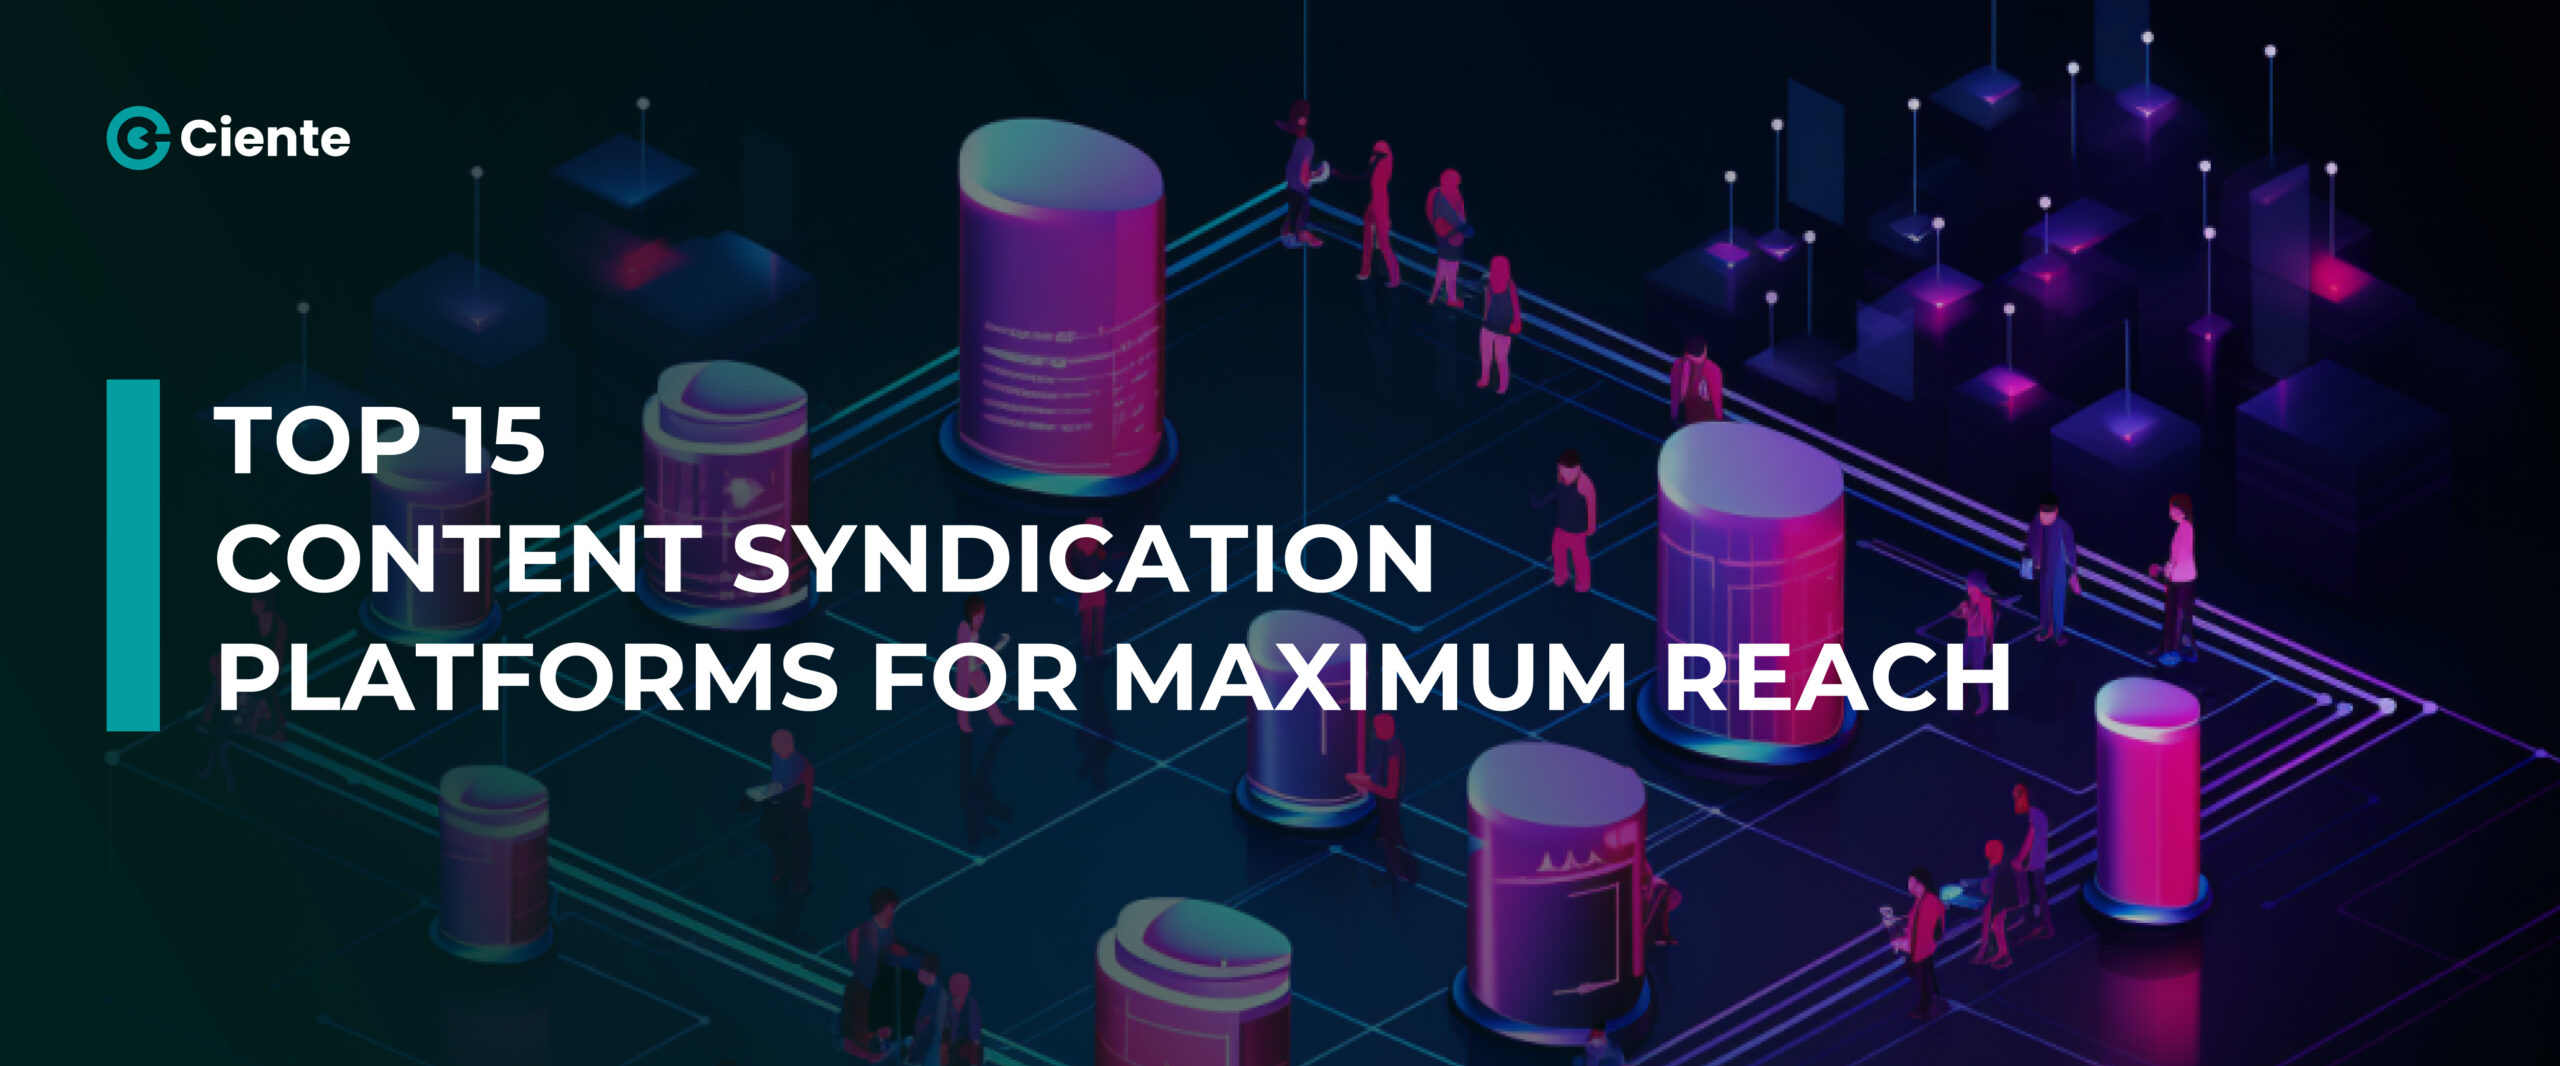 Top 15 Content Syndication Platforms for Maximum Reach